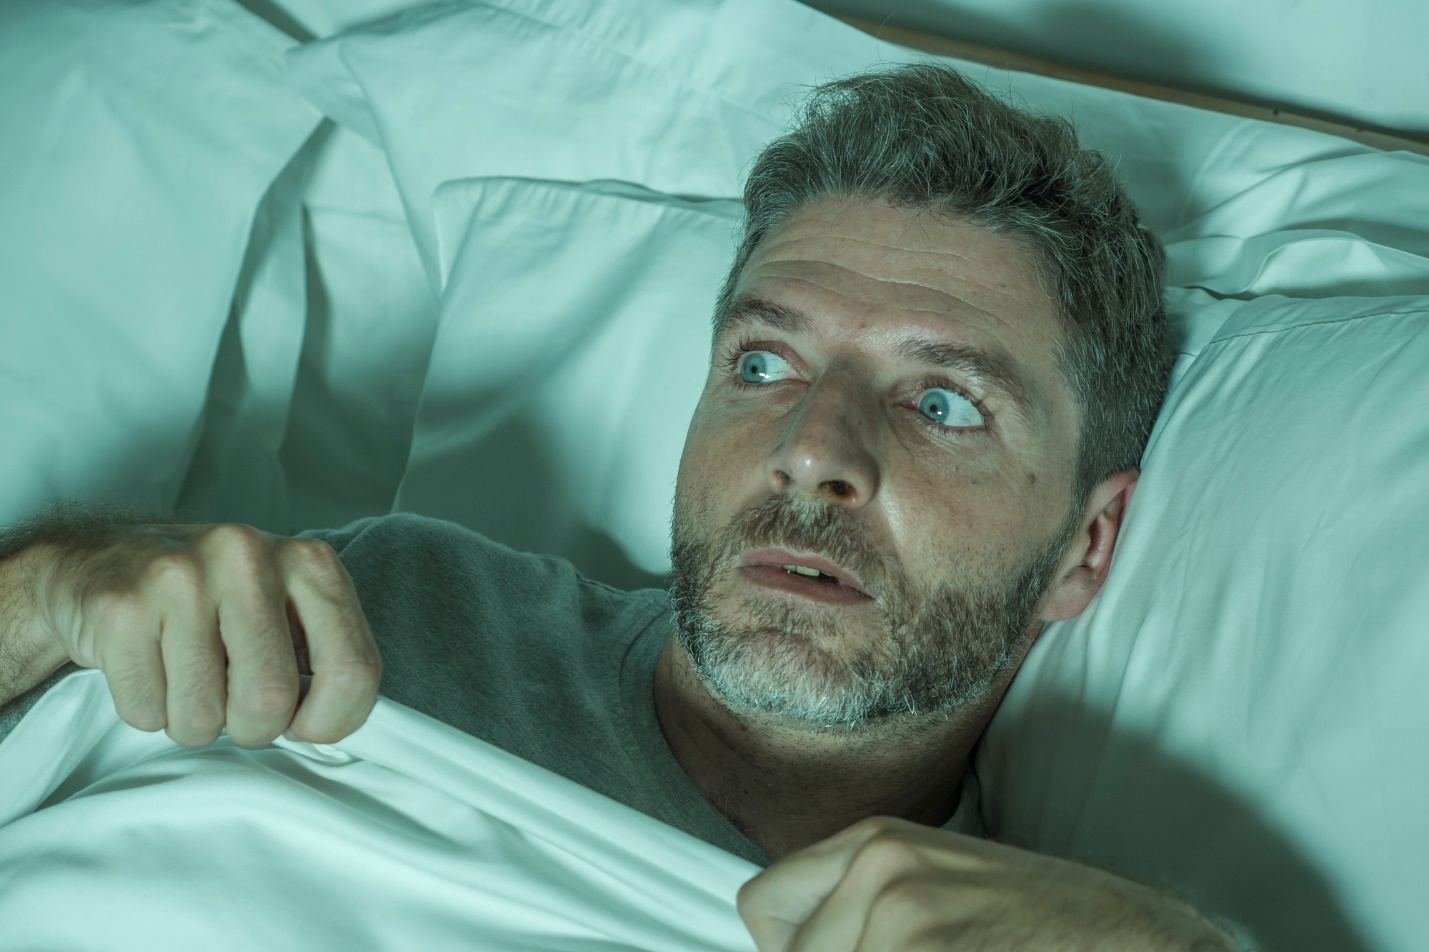 A person lying in bed

Description automatically generated with medium confidence